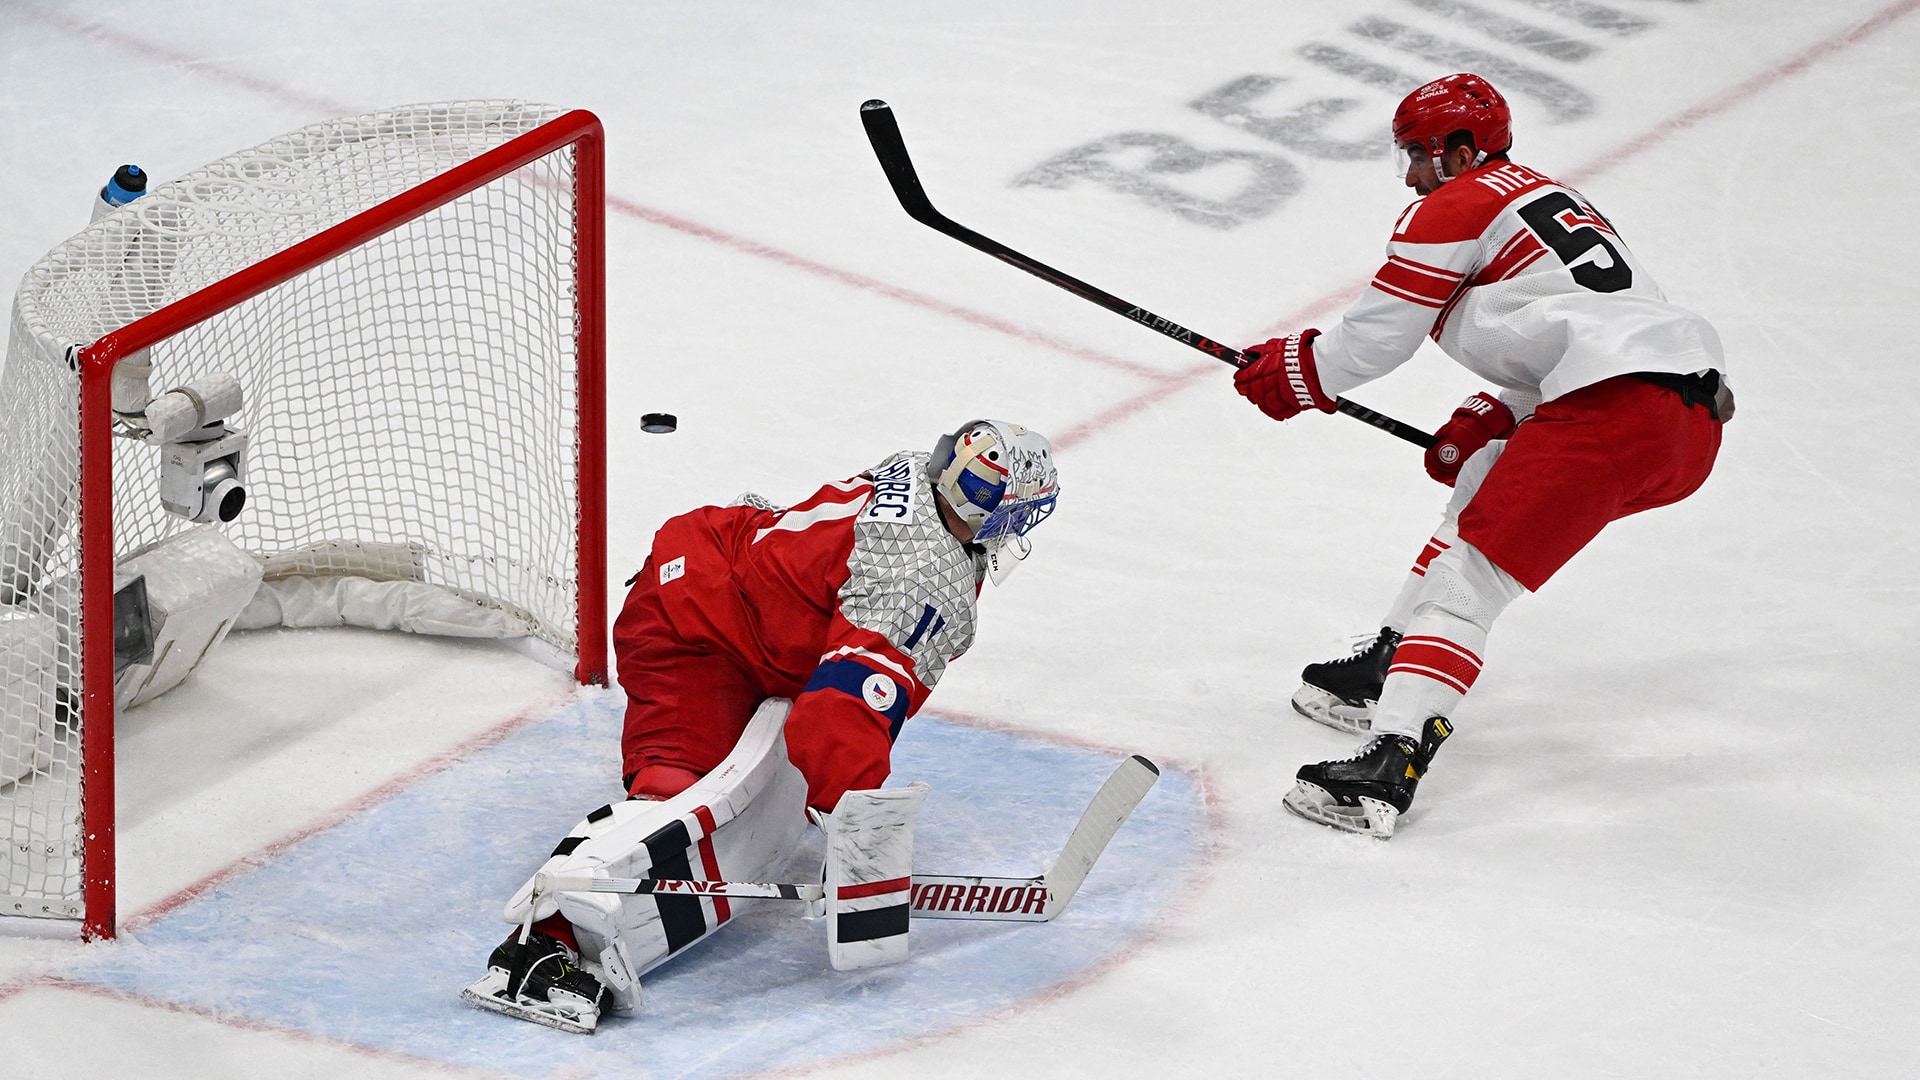 Denmark upsets Czech Republic, wins first-ever mens Olympic hockey game